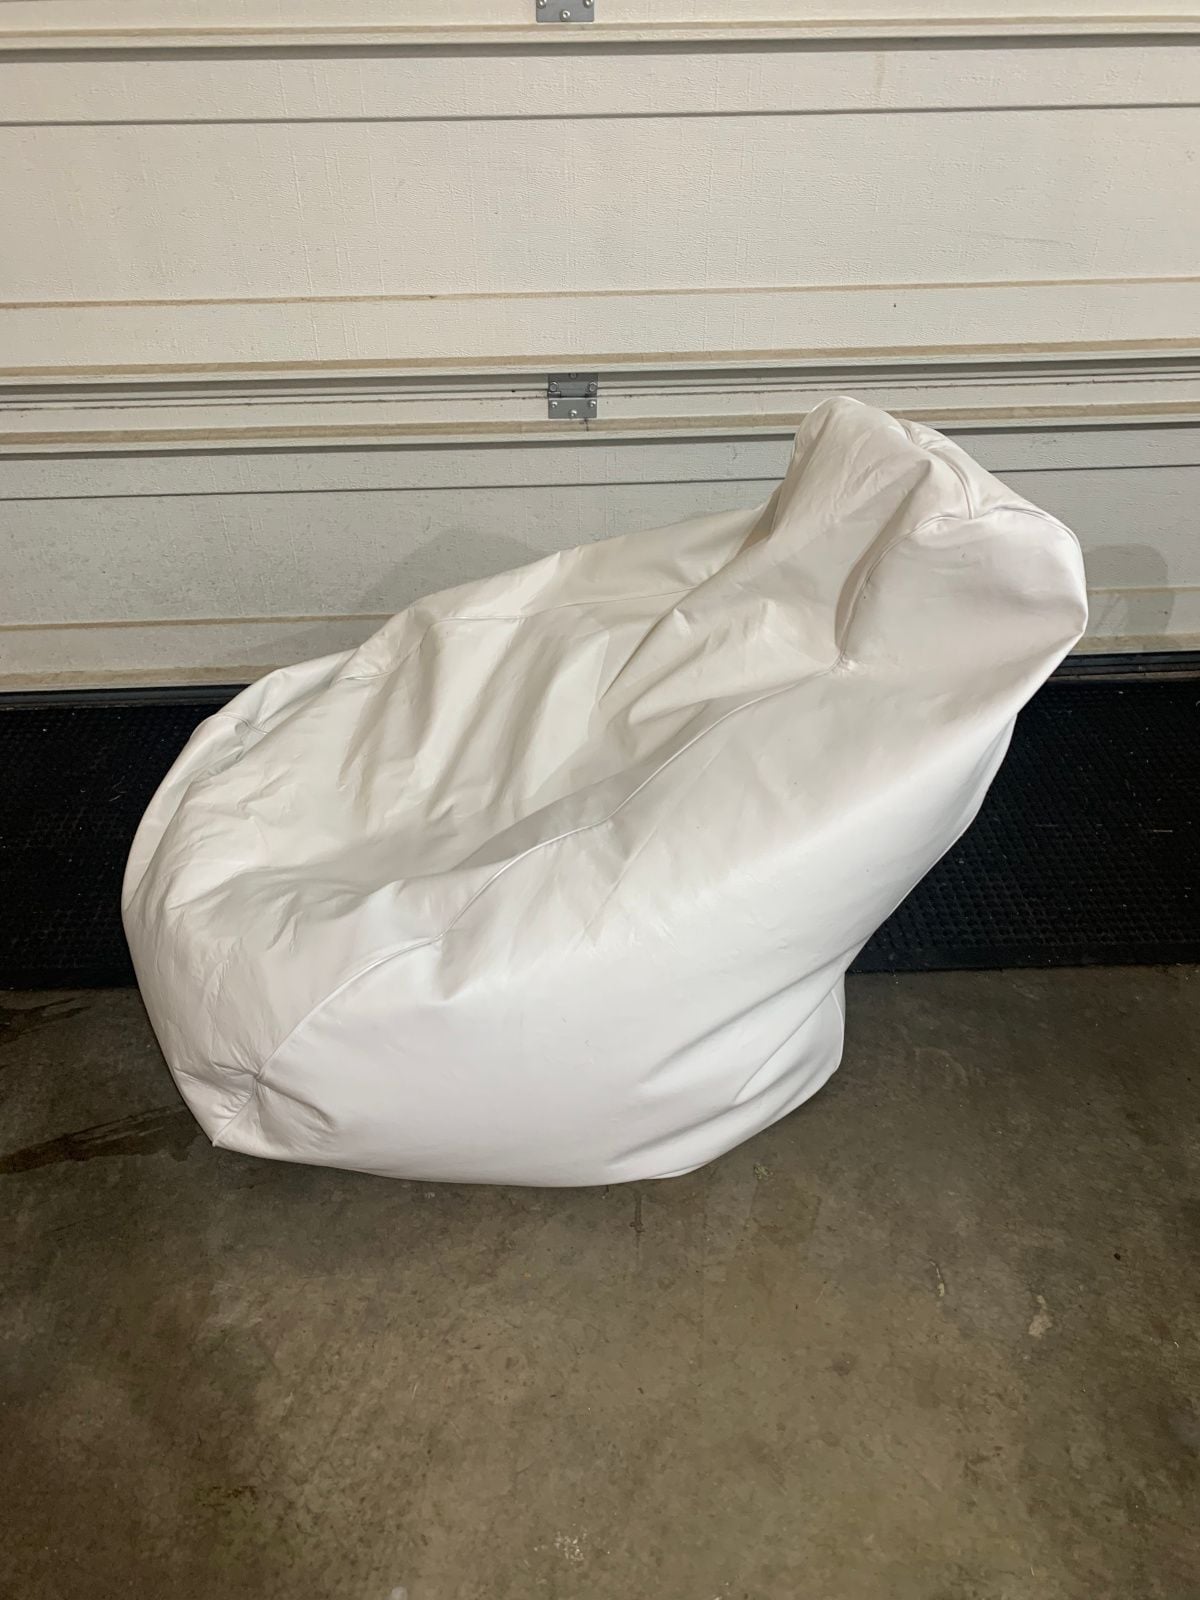 West Marine Bean Bag Chair - The Hull Truth - Boating and Fishing Forum